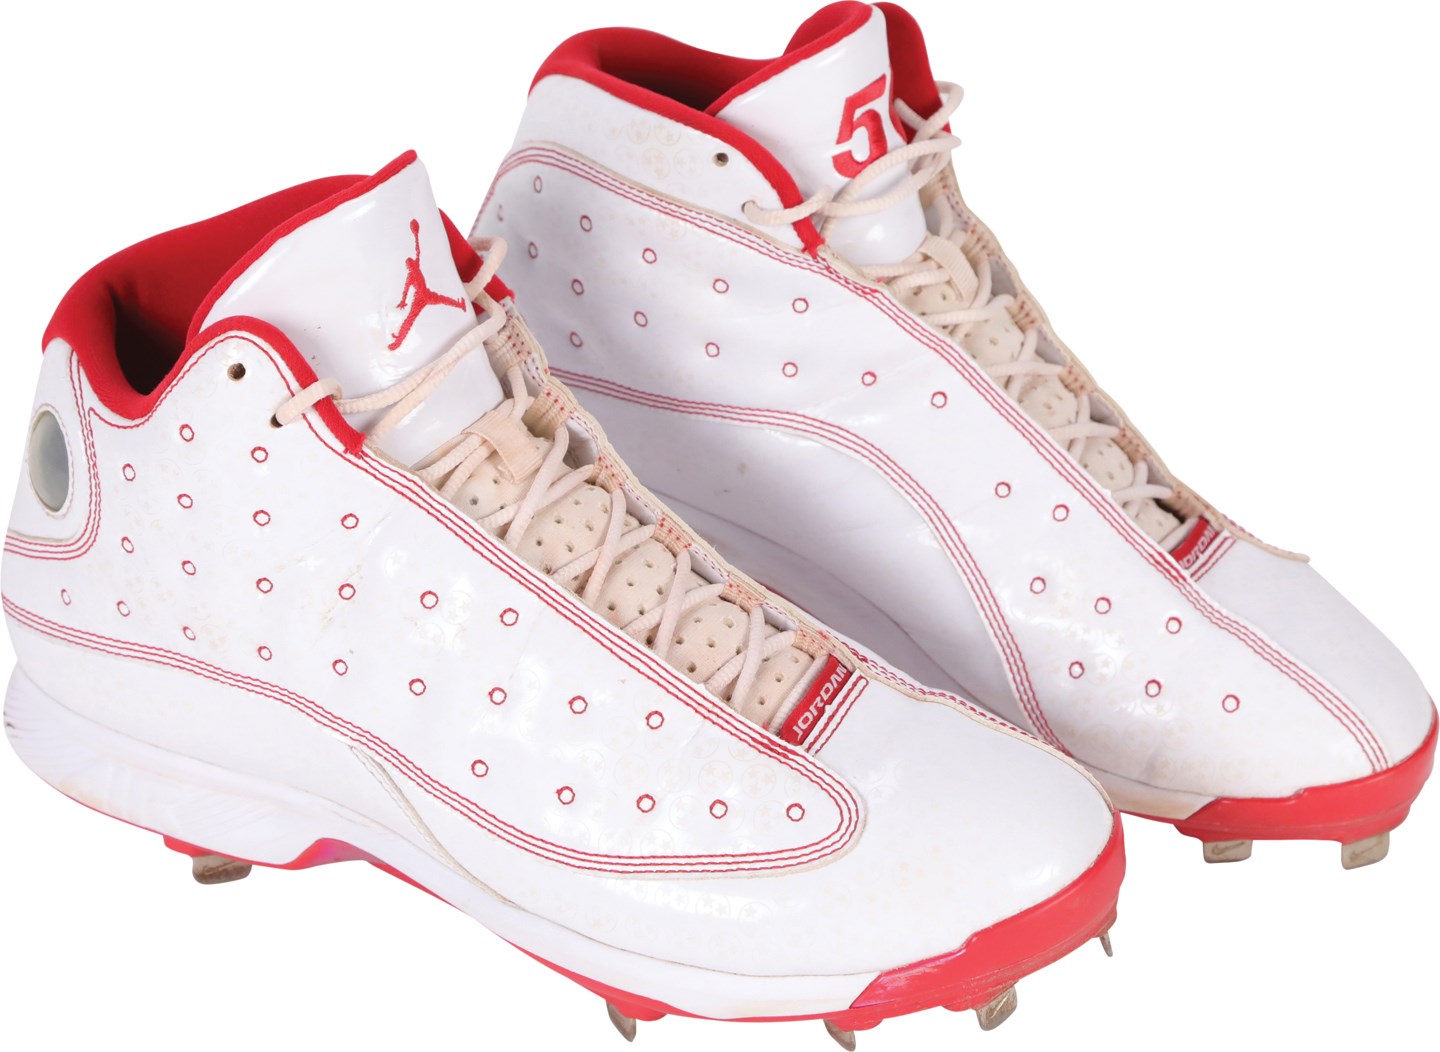 Baseball Equipment - 2019 Mookie Betts Air Jordan 13s Boston Red Sox Game Used Cleats - Photo-Matched to SEVEN Games inc. London Series & Two Home Runs (Betts LOA & Fanatics)